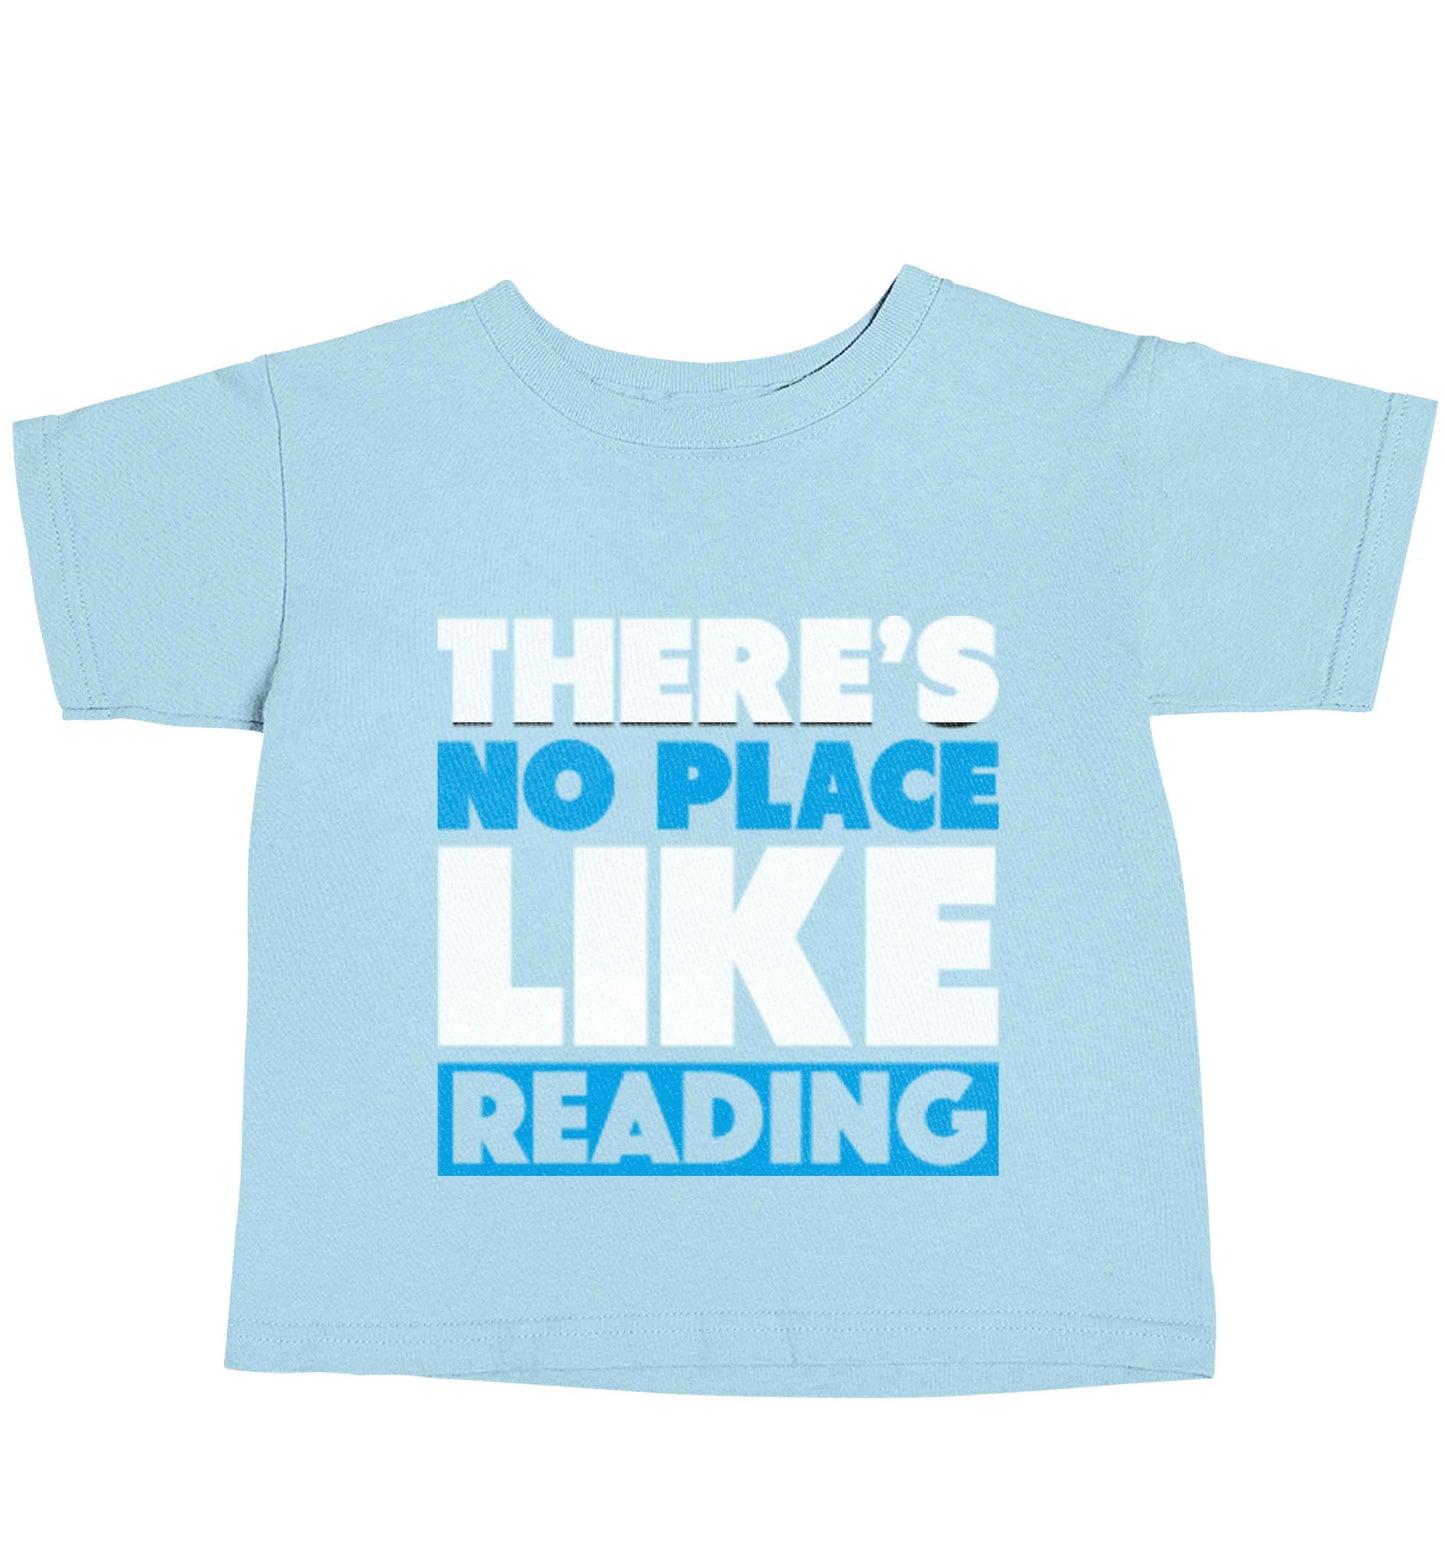 There's no place like Readinglight blue baby toddler Tshirt 2 Years